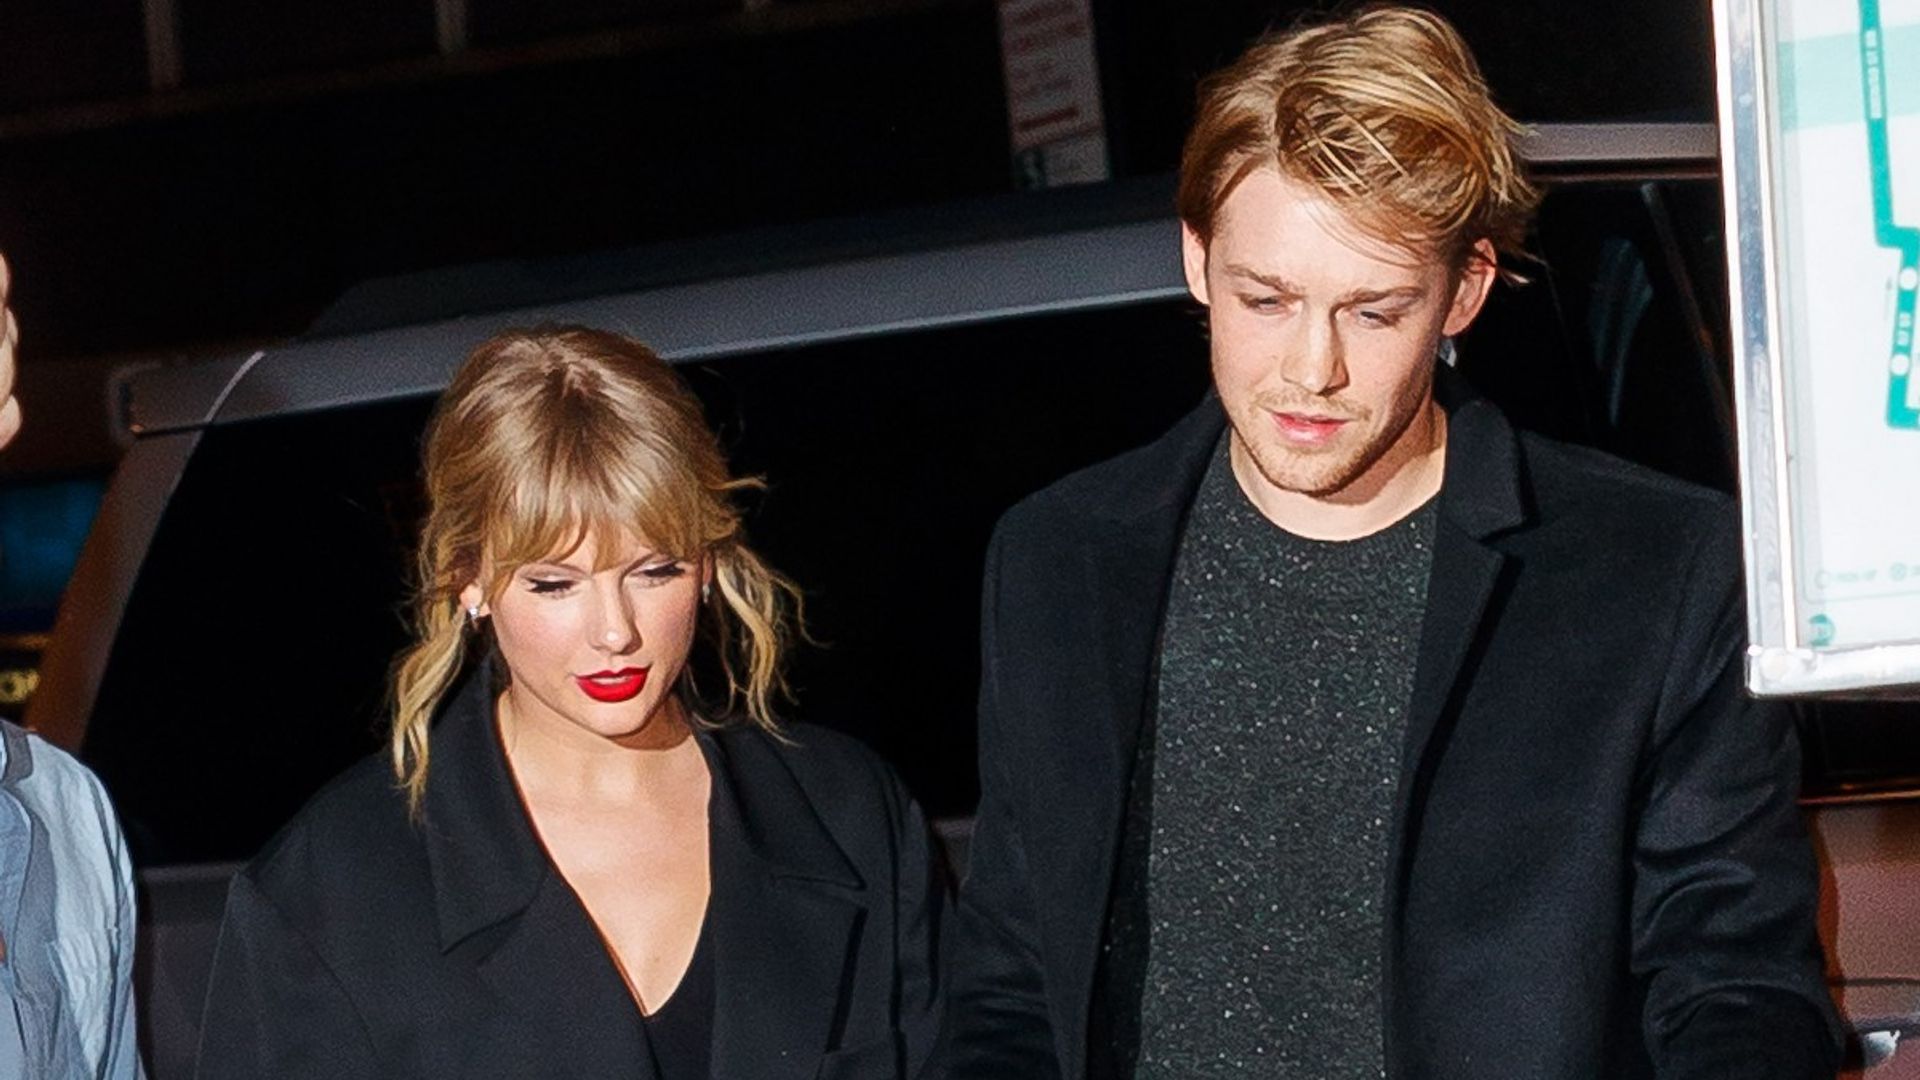 Conversations with Friends star Joe Alwyn opens up about relationship with Taylor Swift in very rare interview